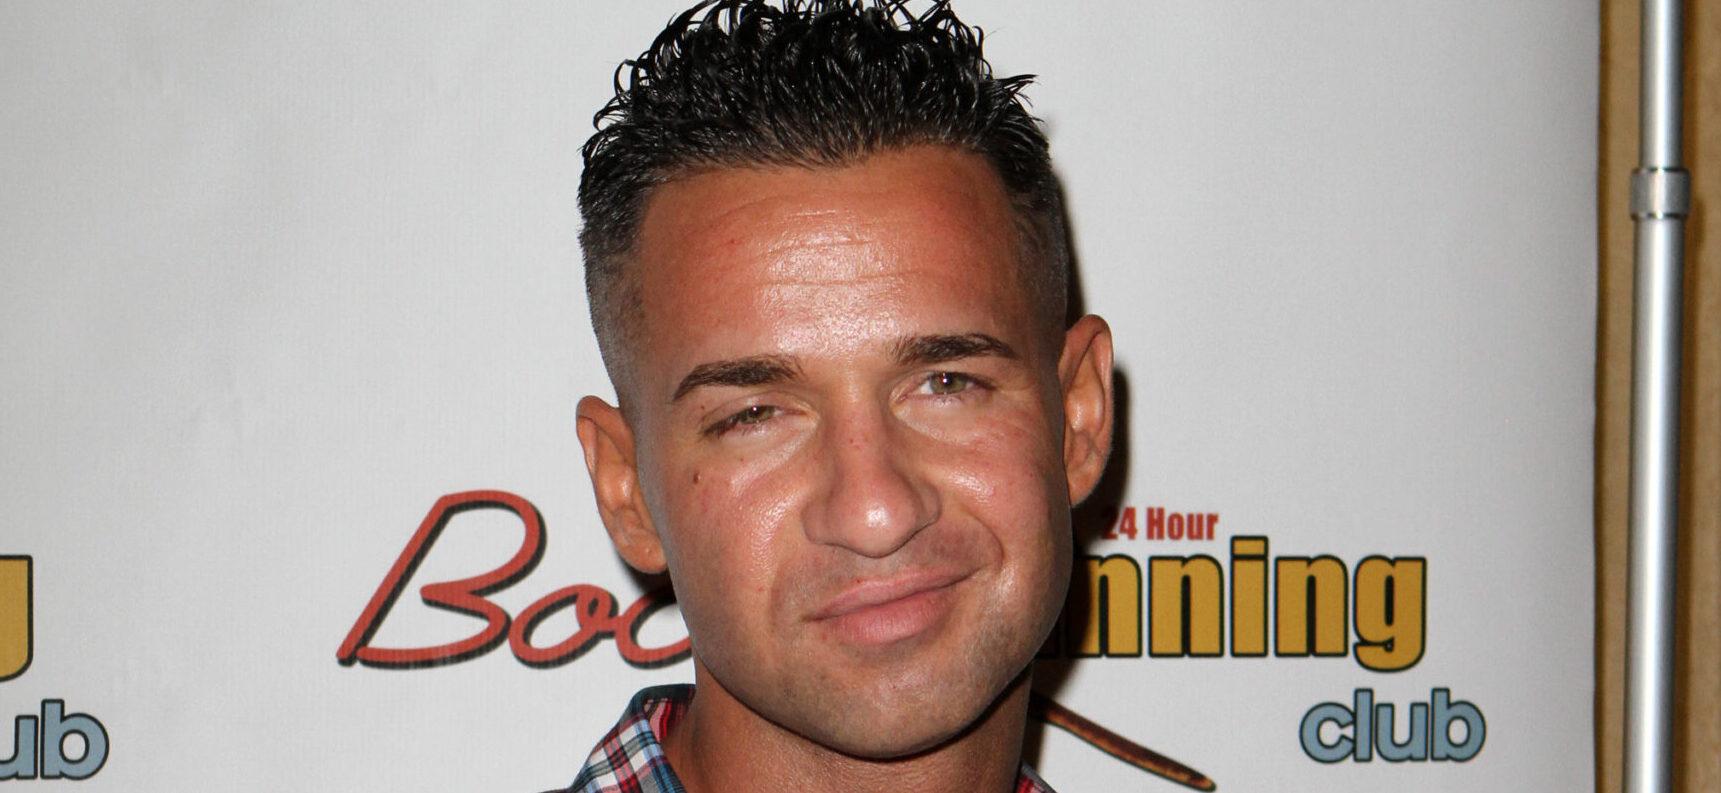 Mike ‘The Situation’ Sorrentino Recalls Spending Massive Amounts On Drugs